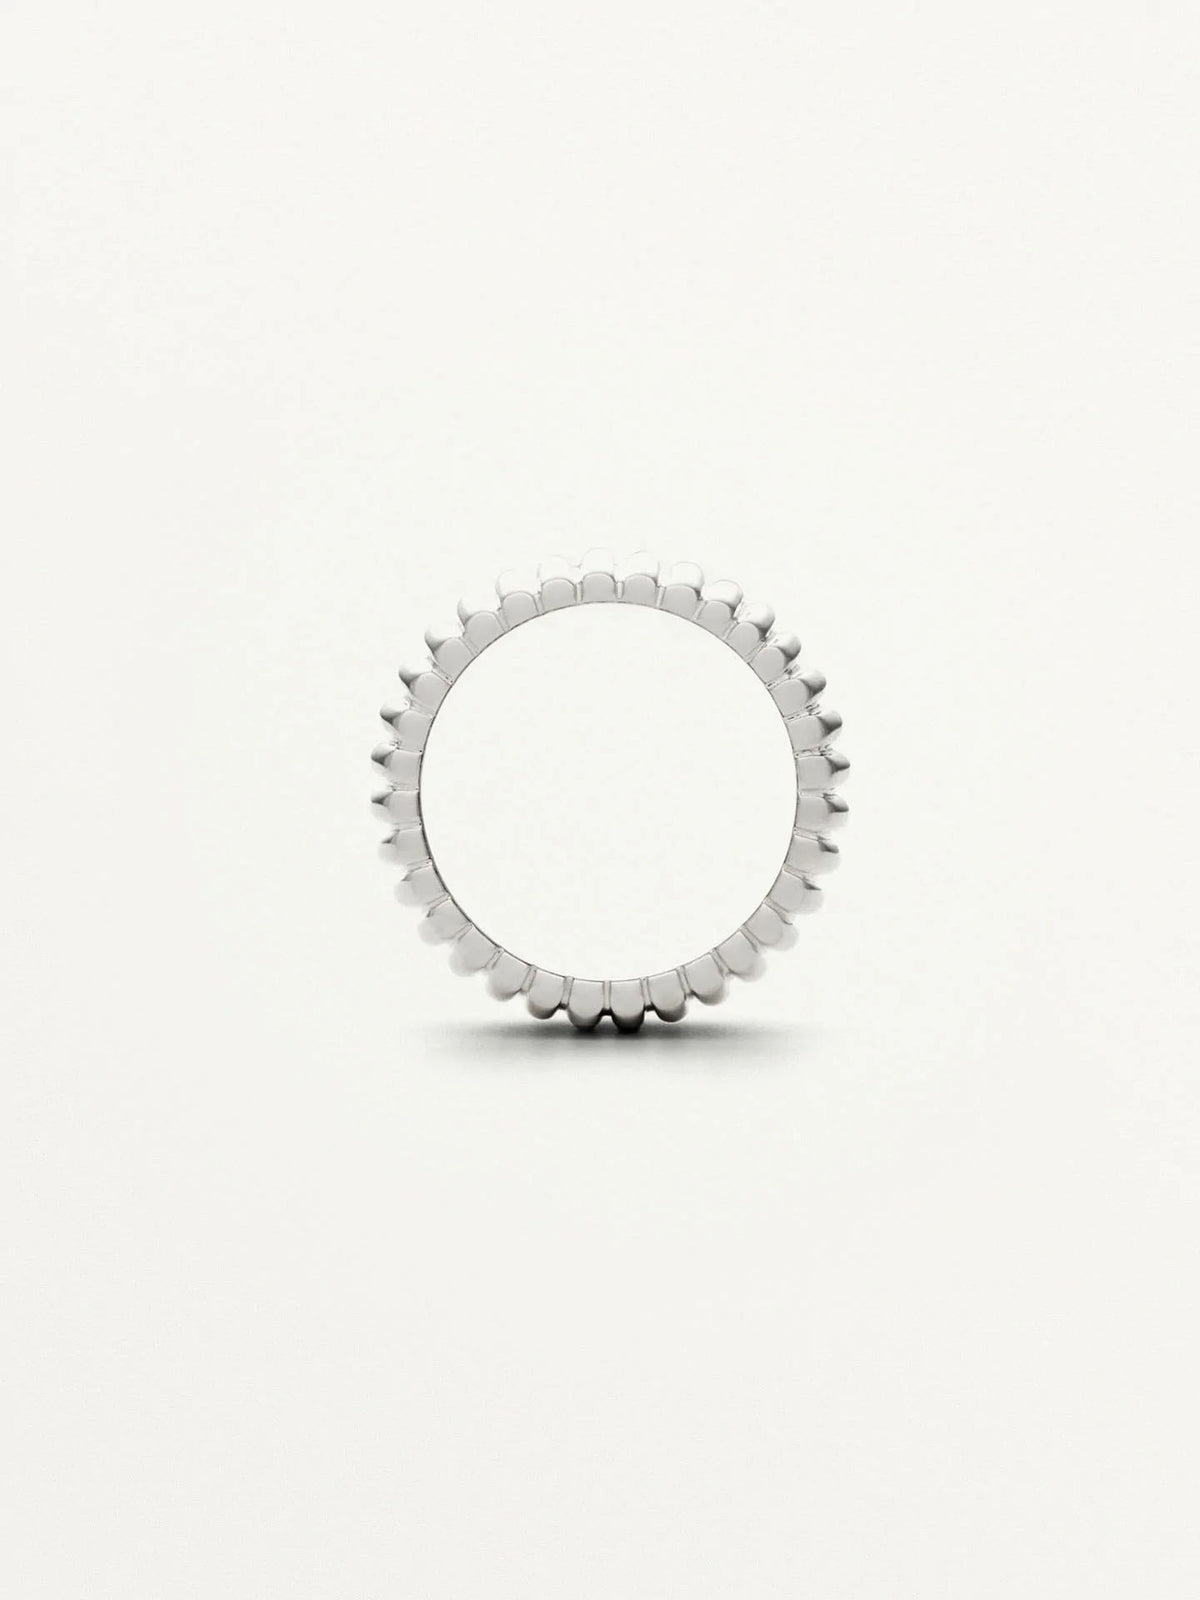 Neo Concrete Movement Ring - Boutee